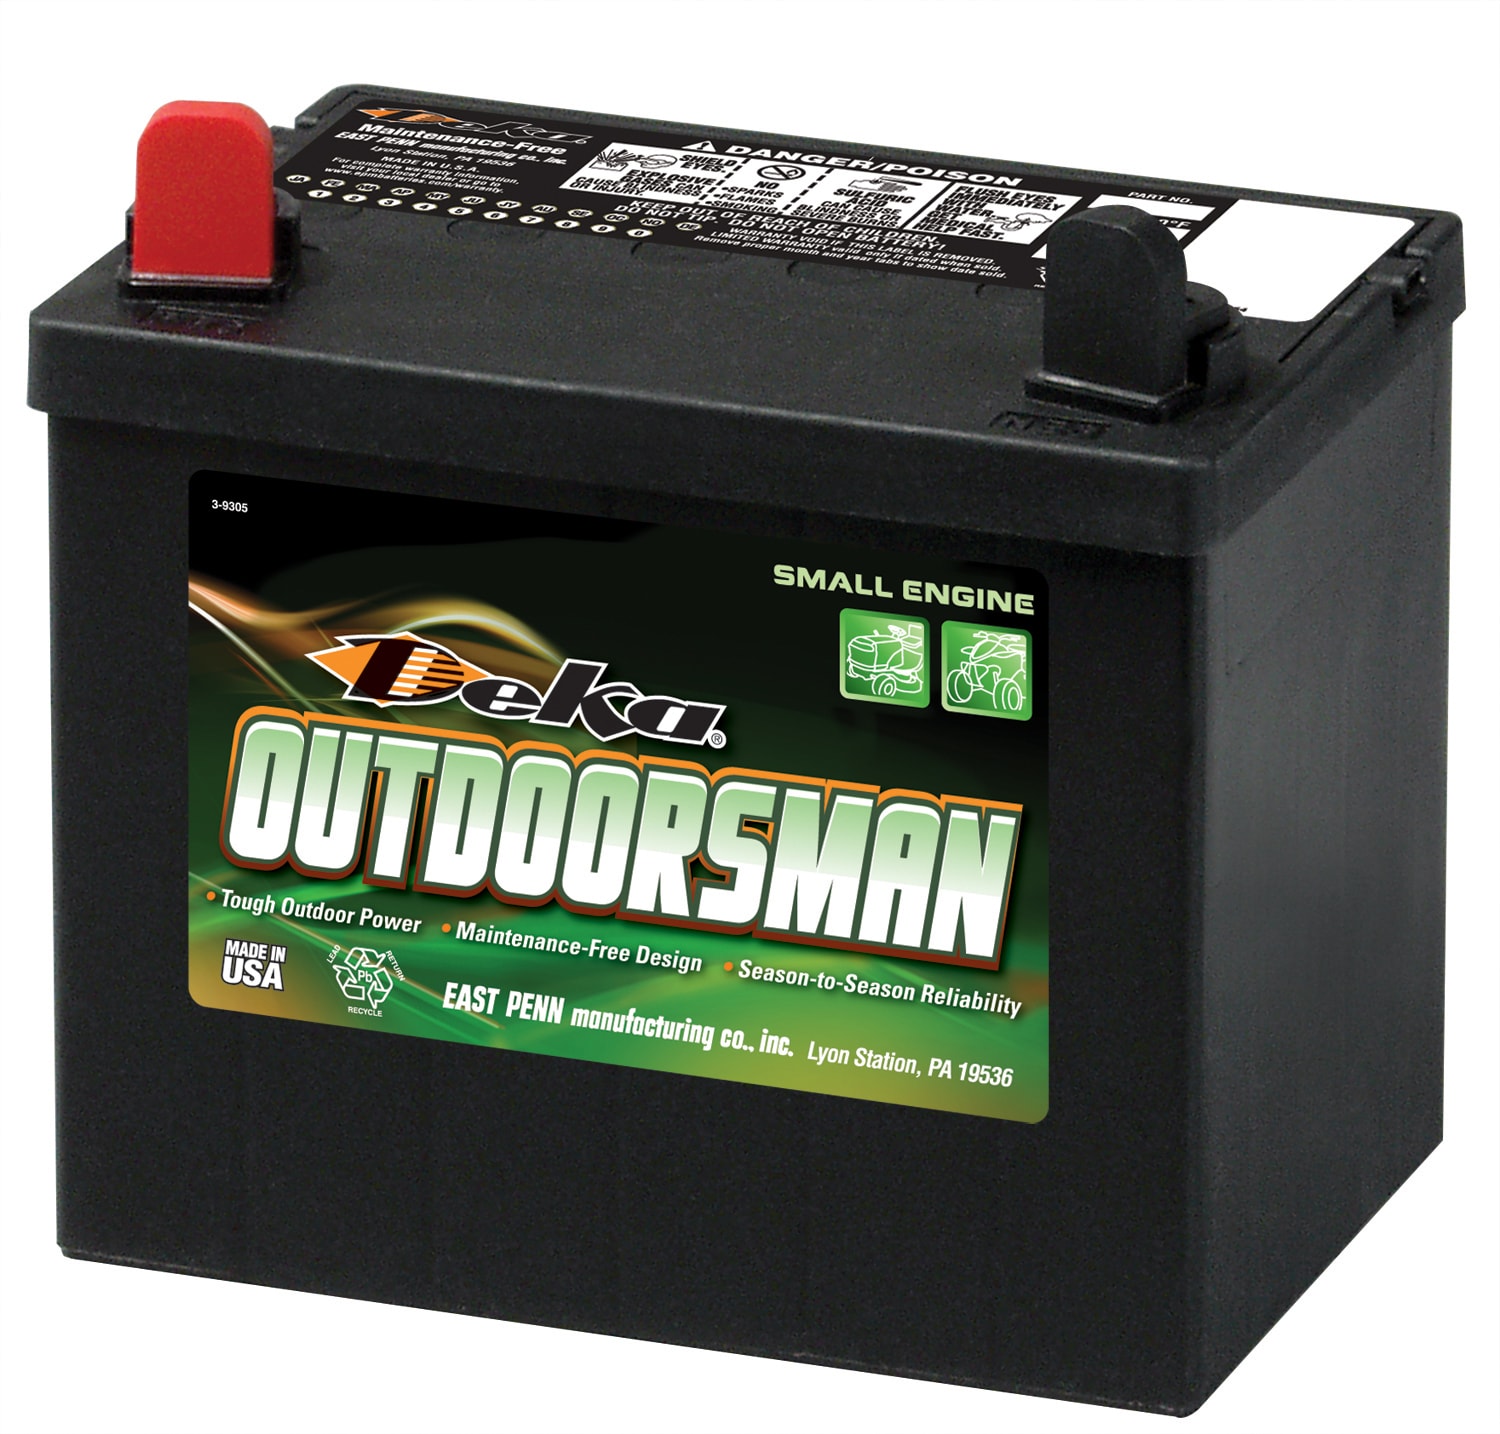  AJC Battery Compatible with Black & Decker Grasshog - CST2000  12V 5Ah Lawn and Garden Battery : Health & Household